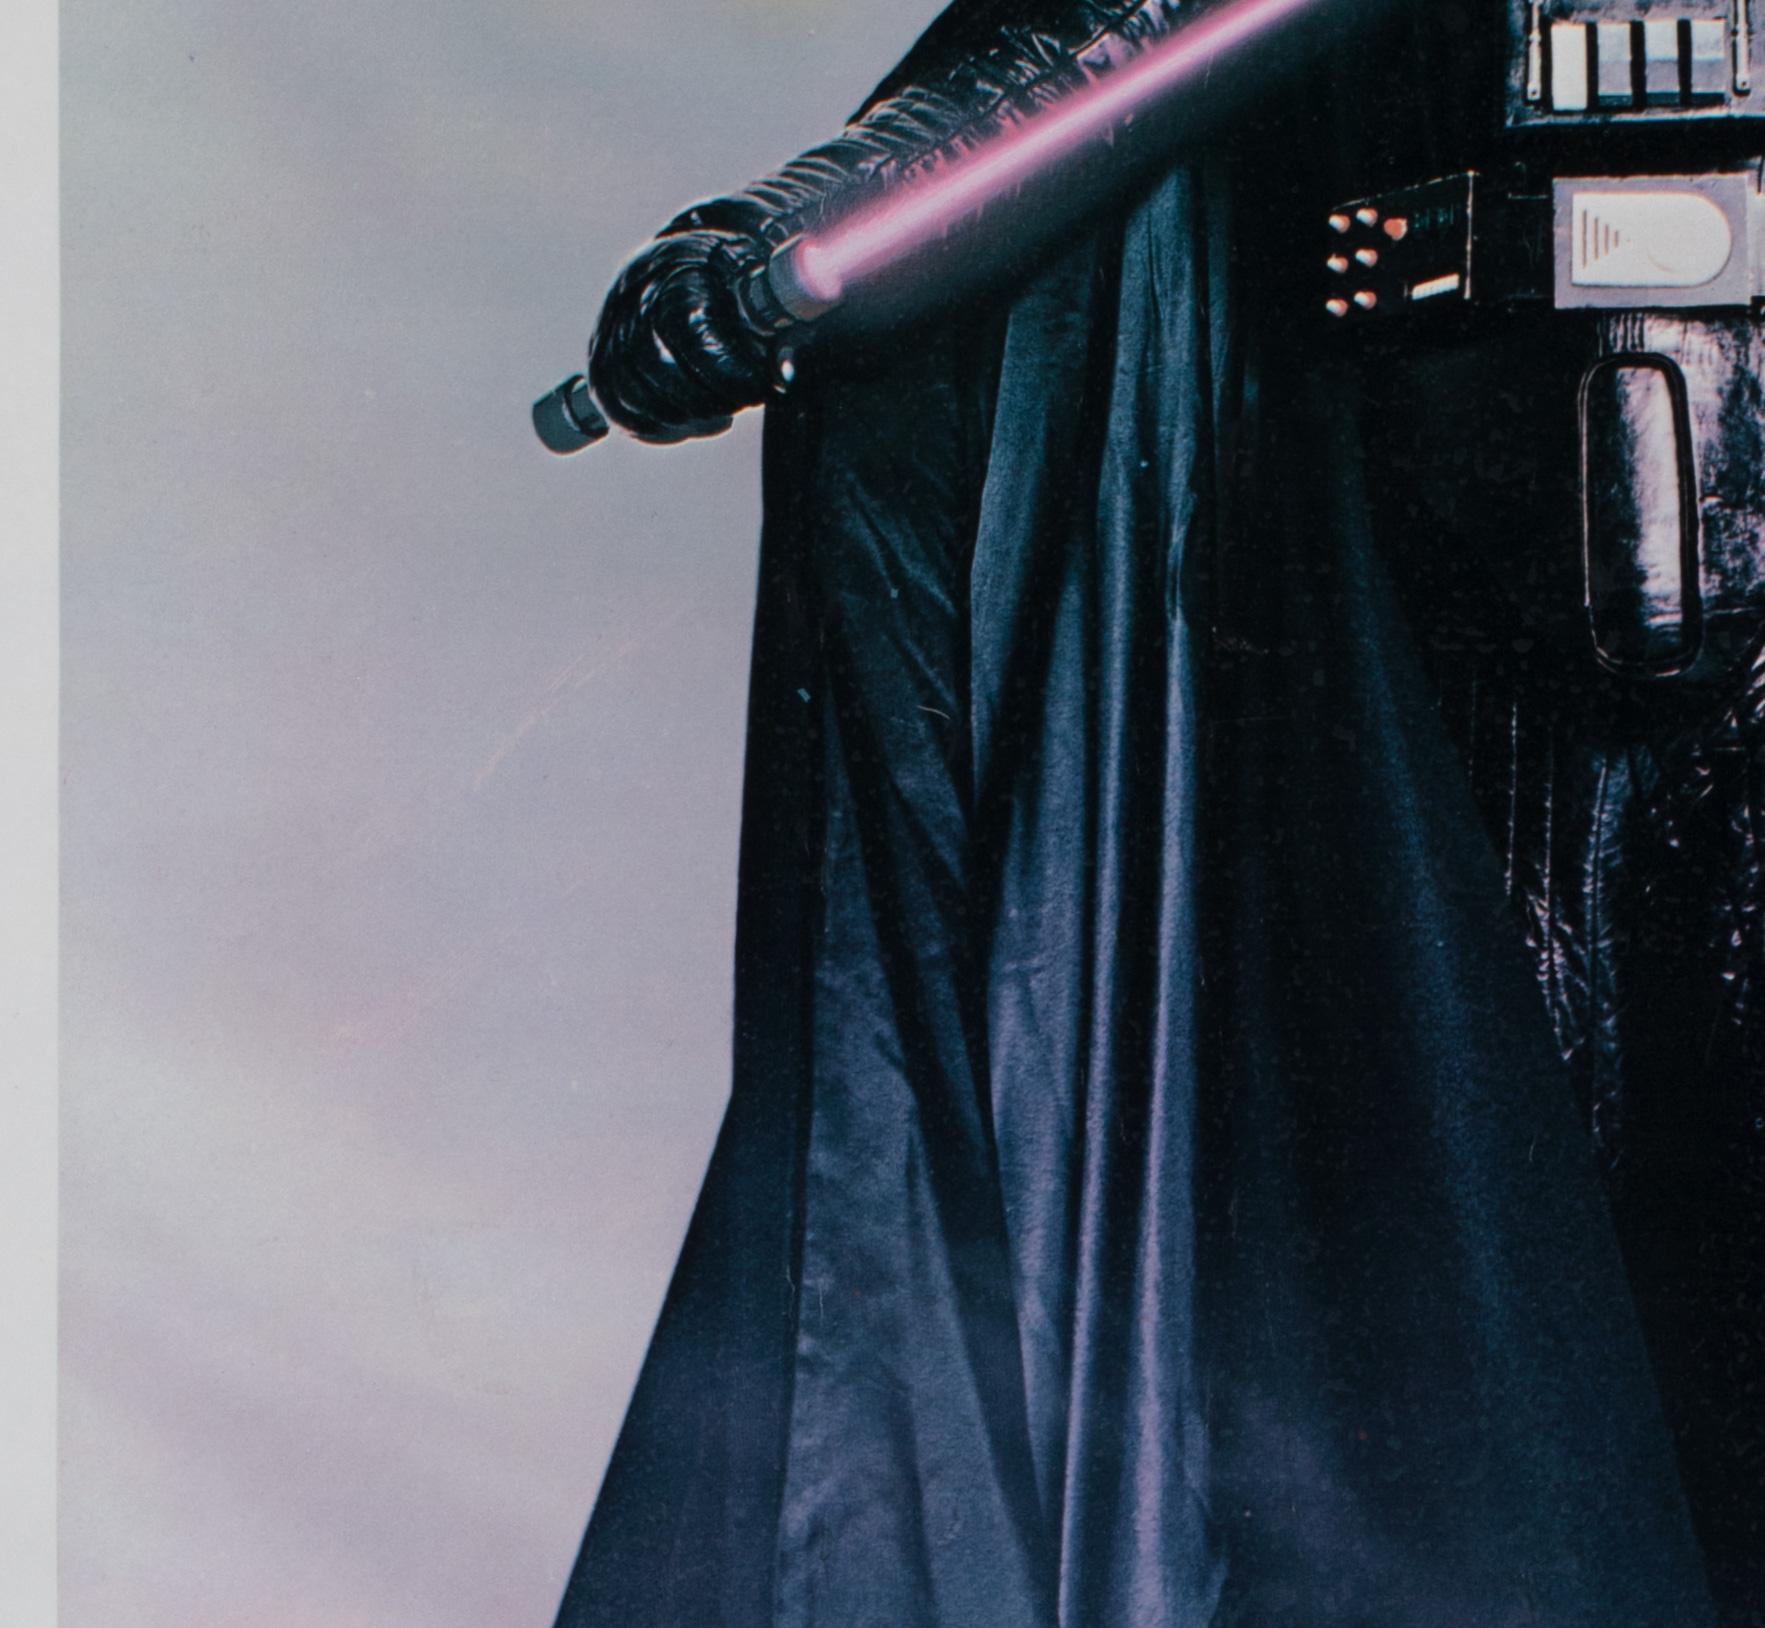 Star Wars Darth Vader 1977 Vintage Factor Inc Commercial Poster In Excellent Condition For Sale In Bath, Somerset